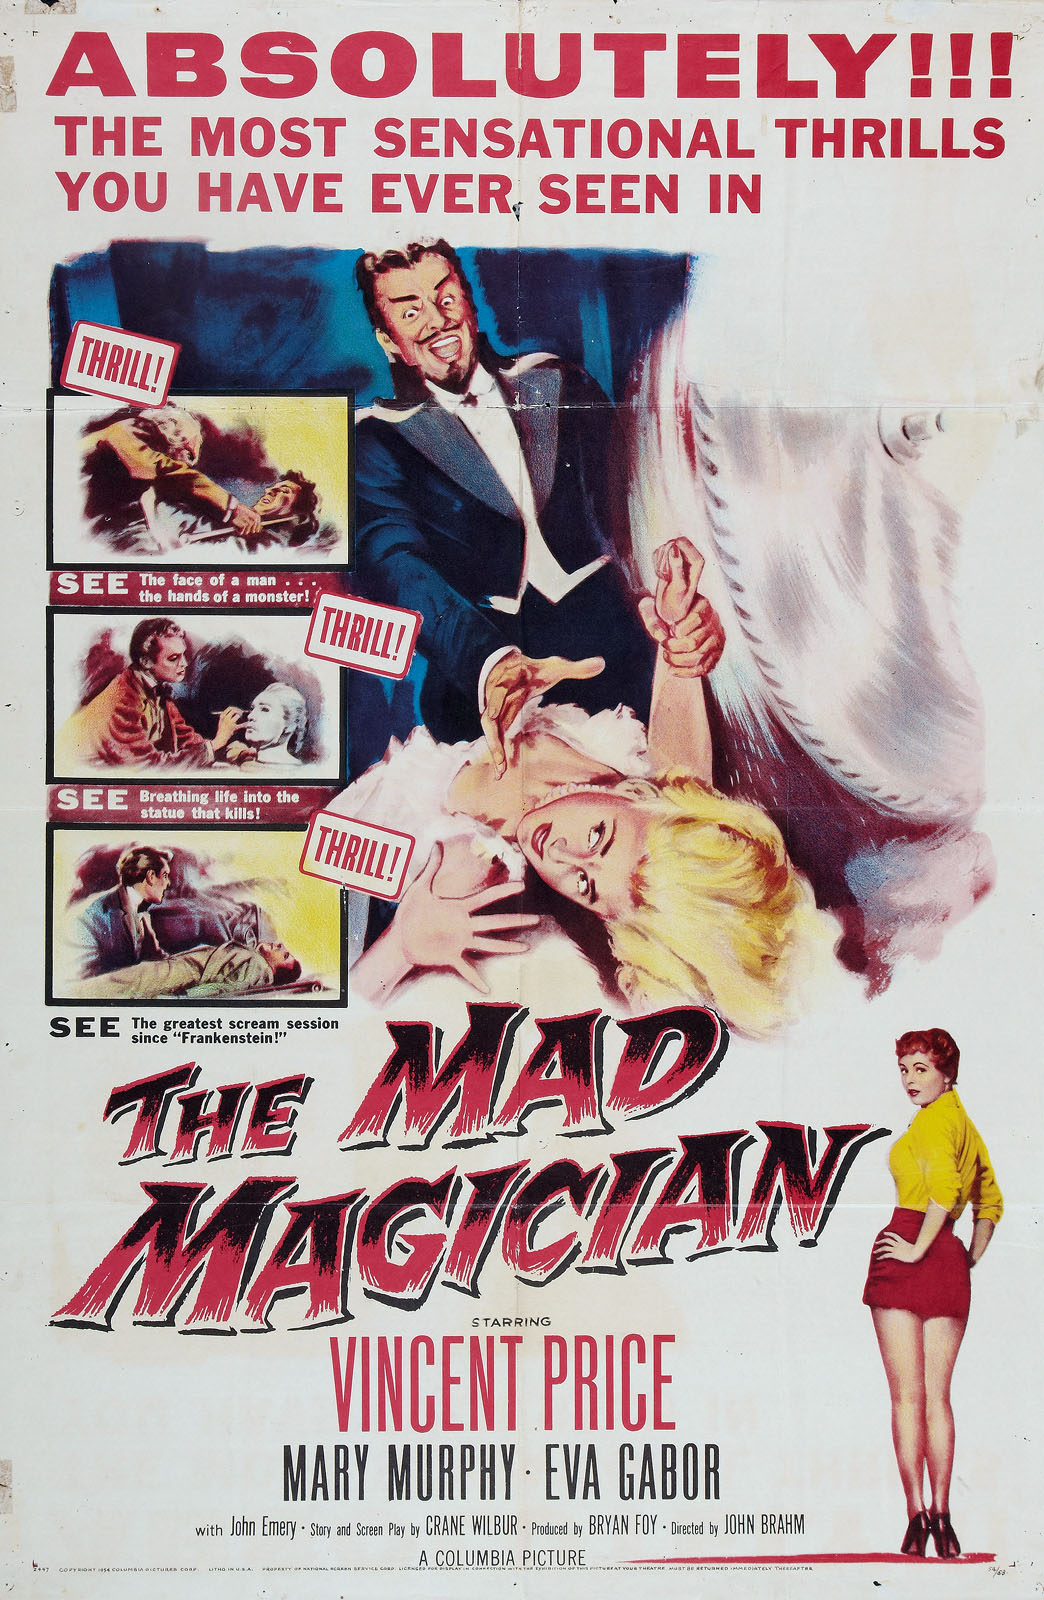 MAD MAGICIAN, THE